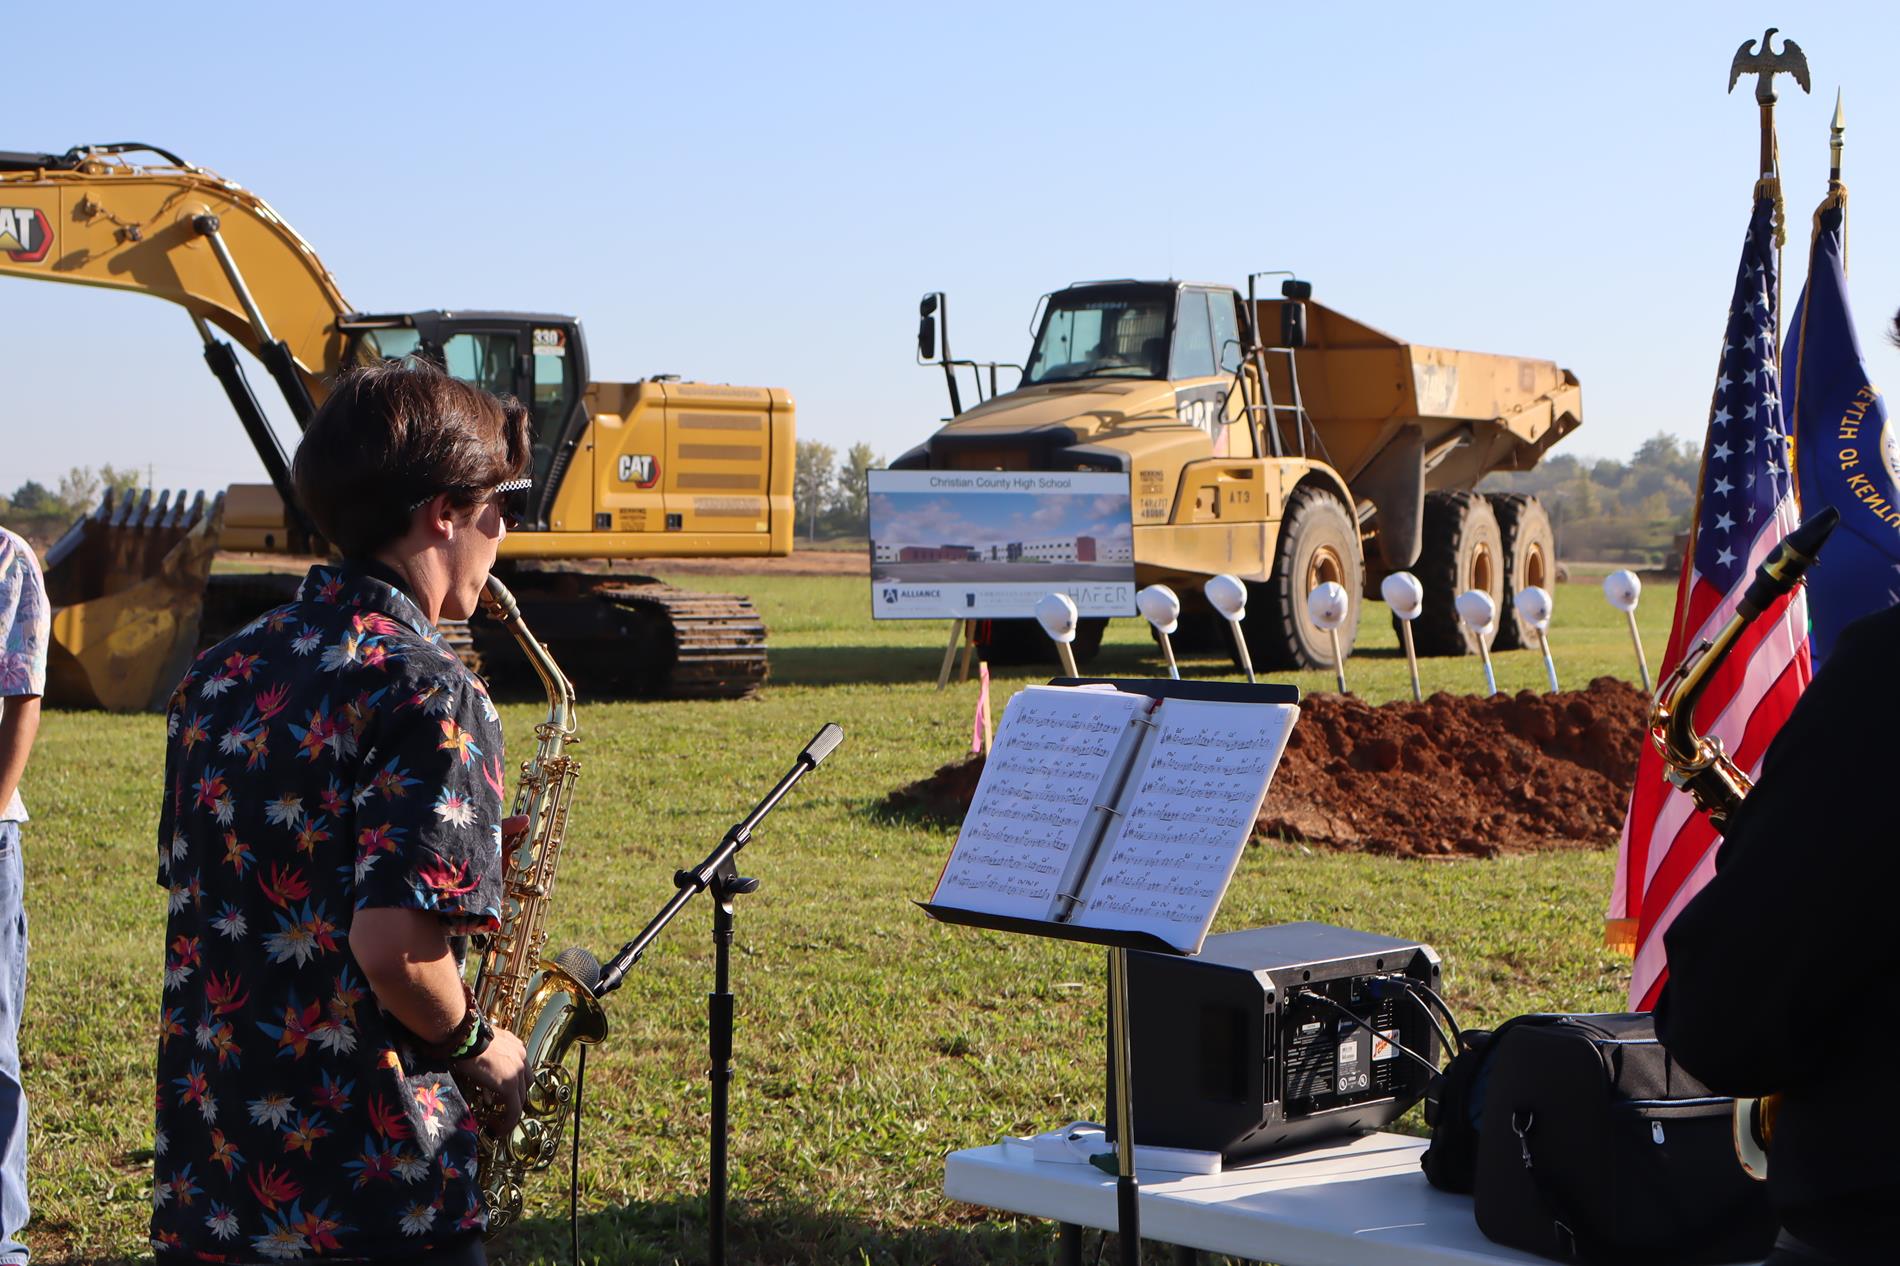 Student at Groundbreaking playing music